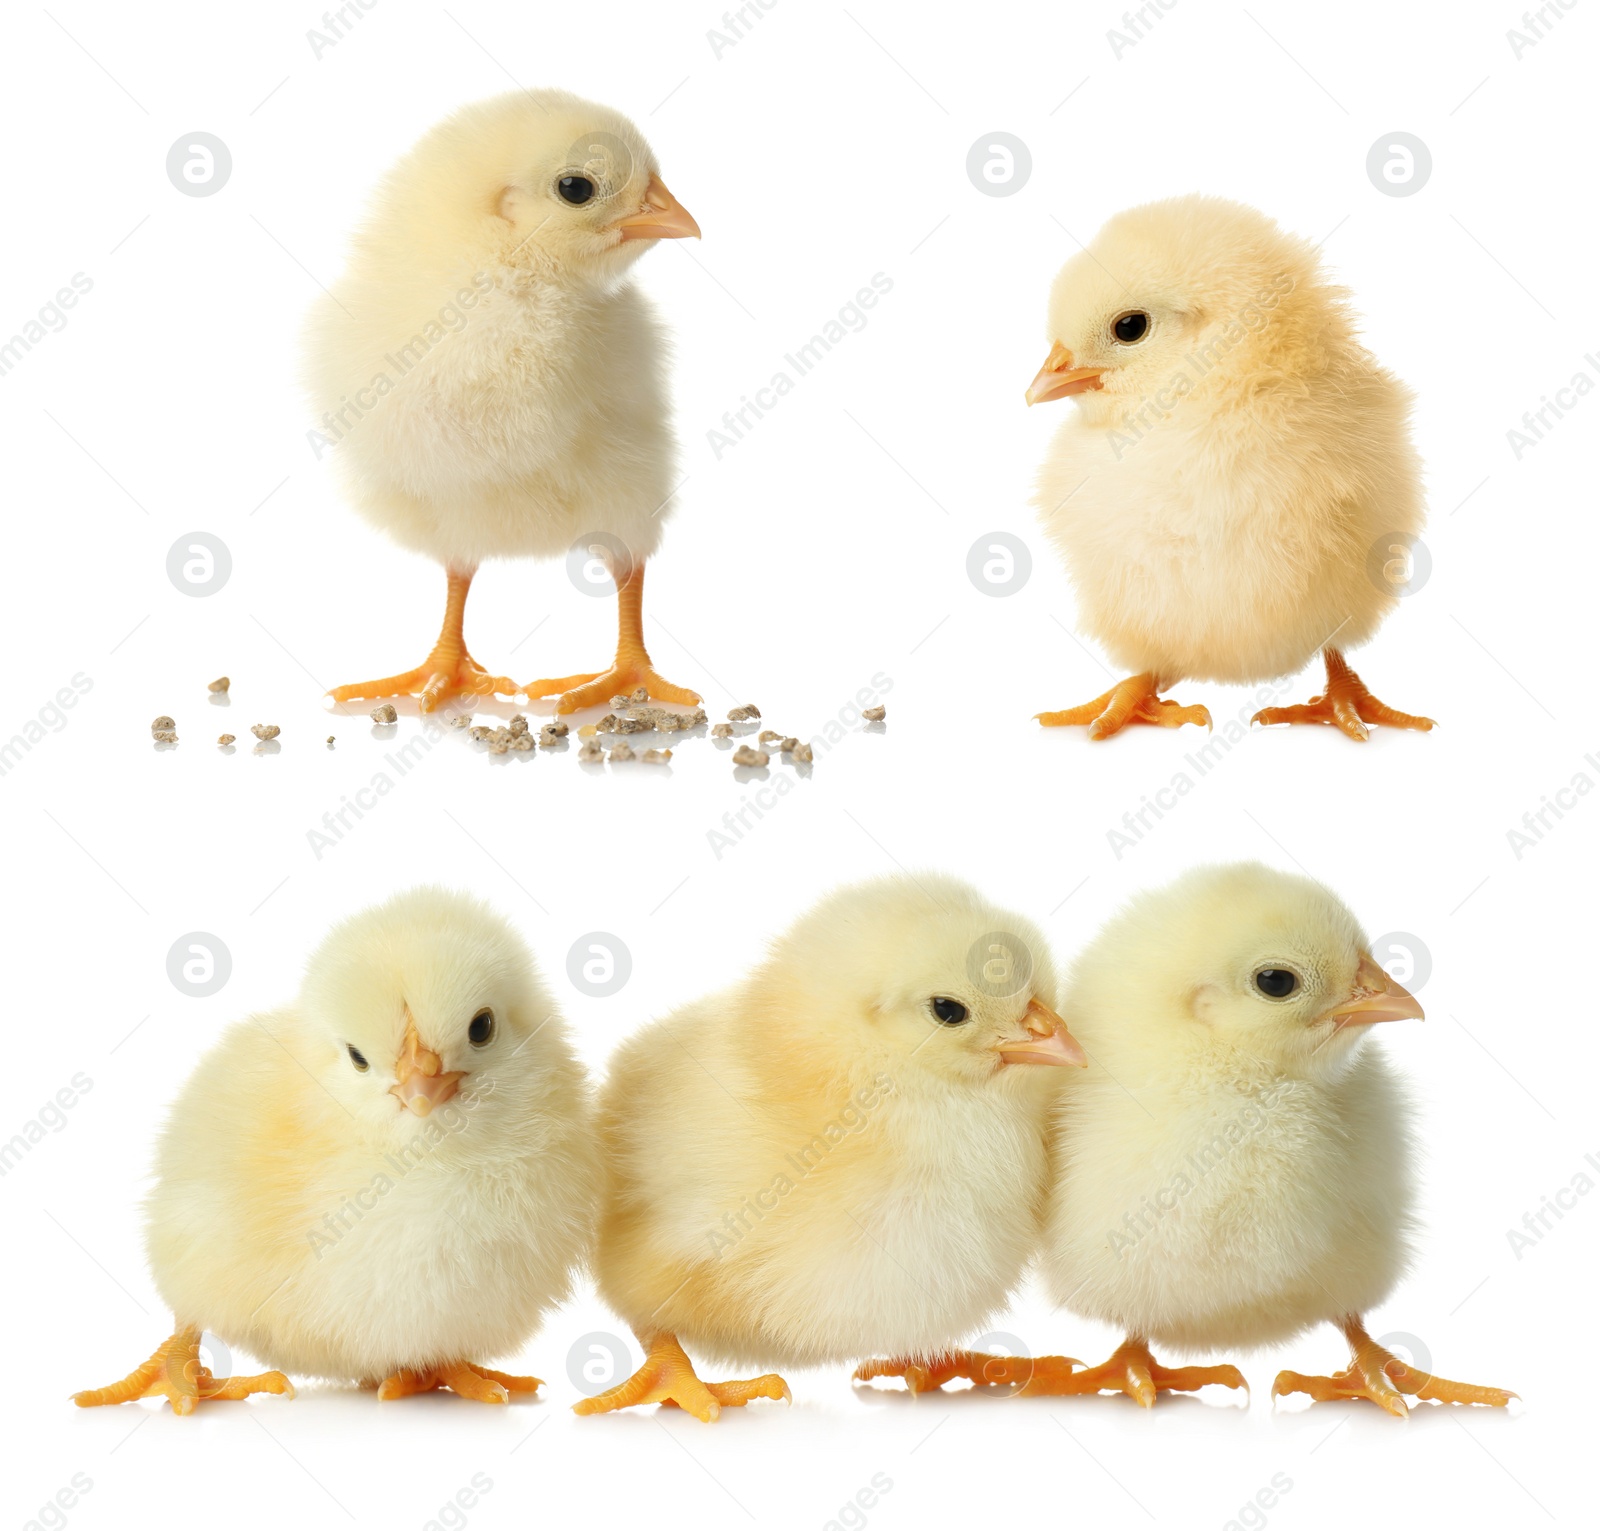 Image of Collage with cute fluffy chickens on white background. Farm animals